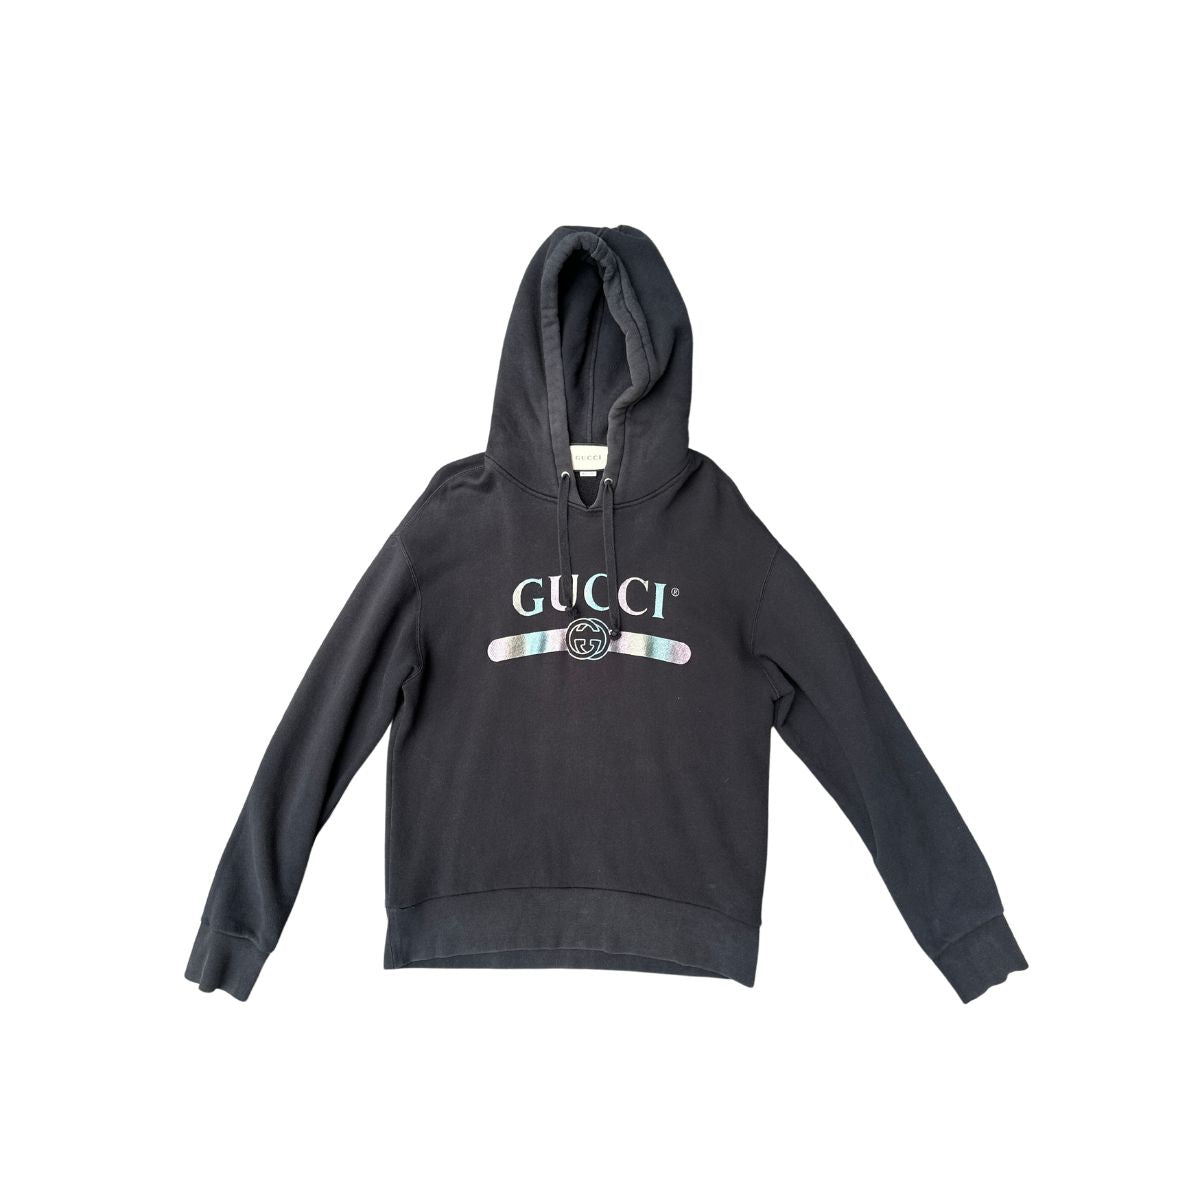 Gucci Ύφασμα πουλόβερ